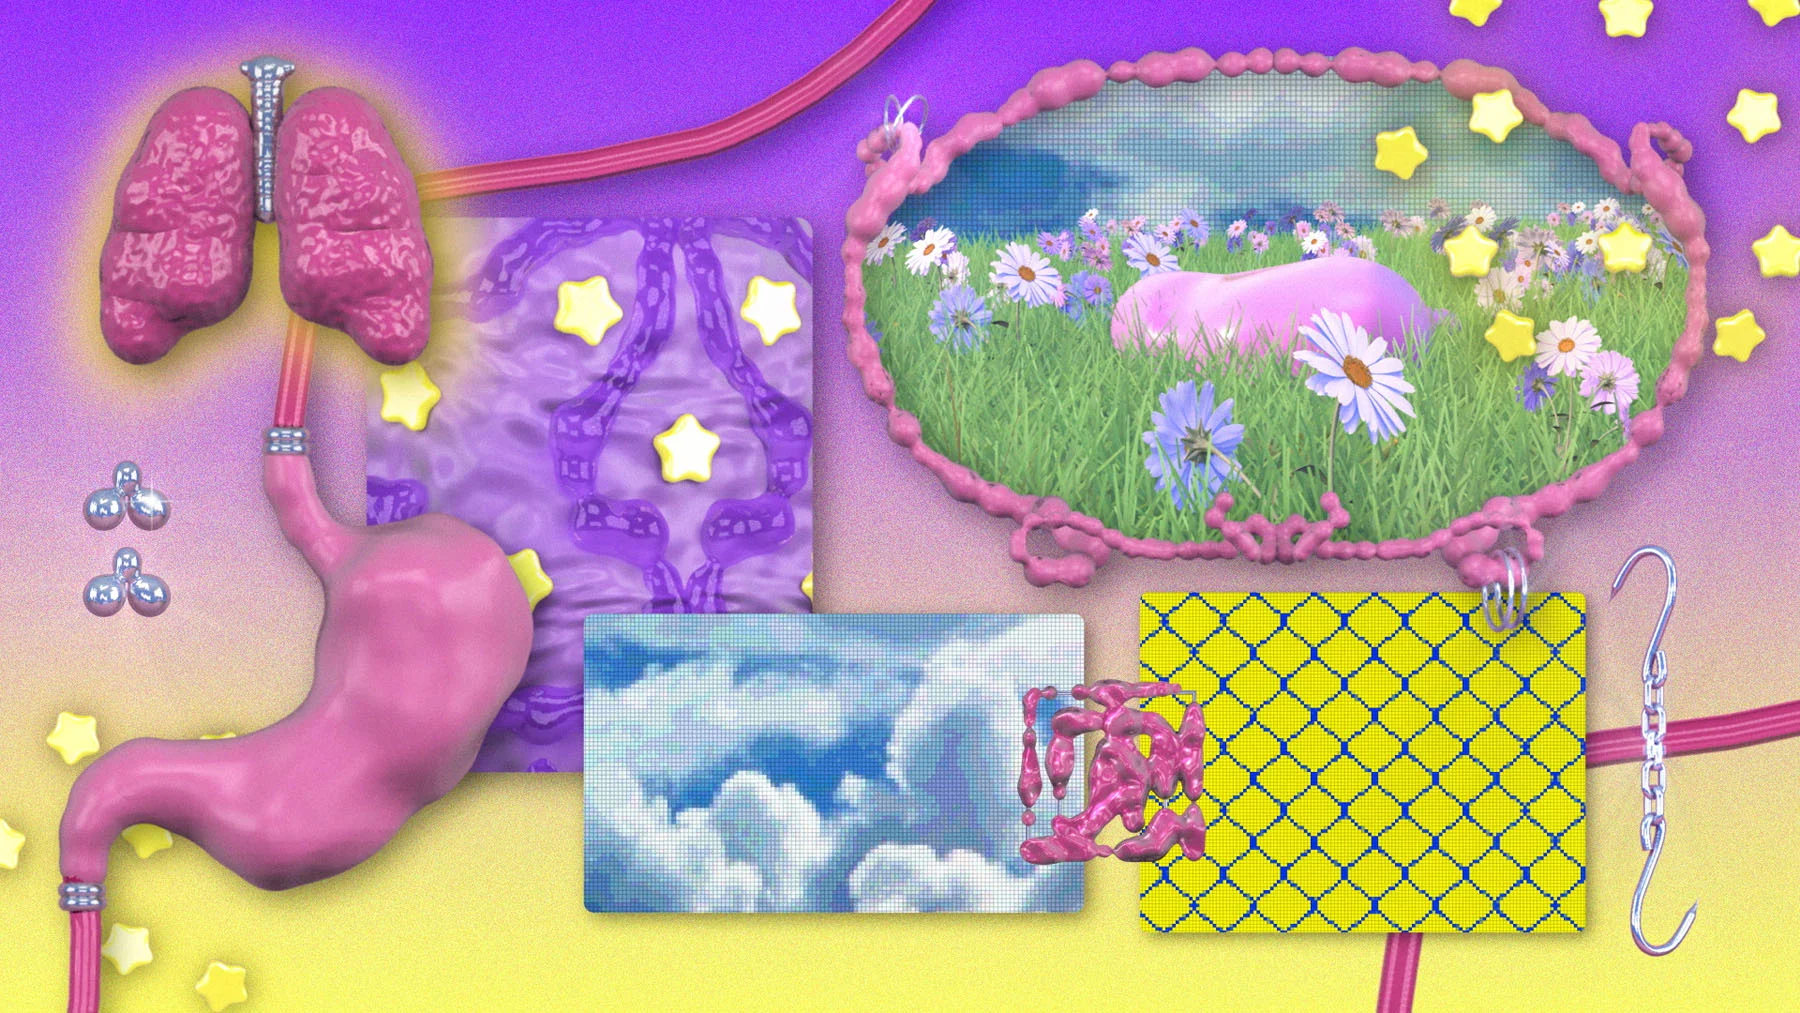 An animated horizontal collage illustration of layered CGI elements on top of a purple and yellow gradient background. Elements include metallic objects like meat hooks and pink internal organ shapes, along with yellow stars and an image of a green grass field with flowers. Elements are moving in a looping motion.